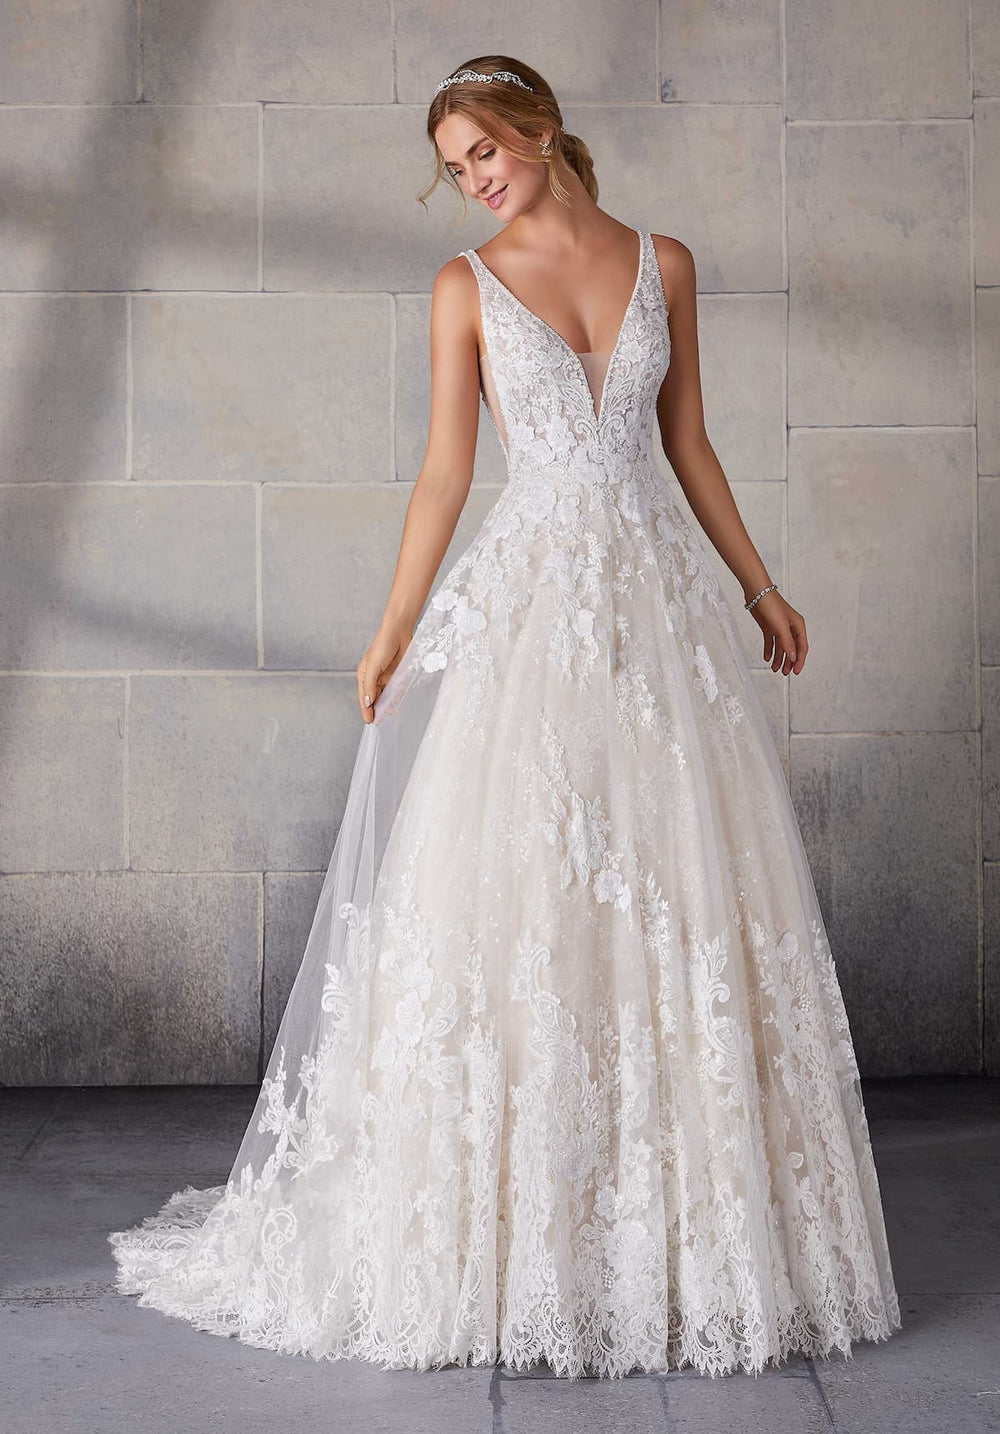 Front view of Morilee 2142 Bridal Gown in Ivory/Champagne.